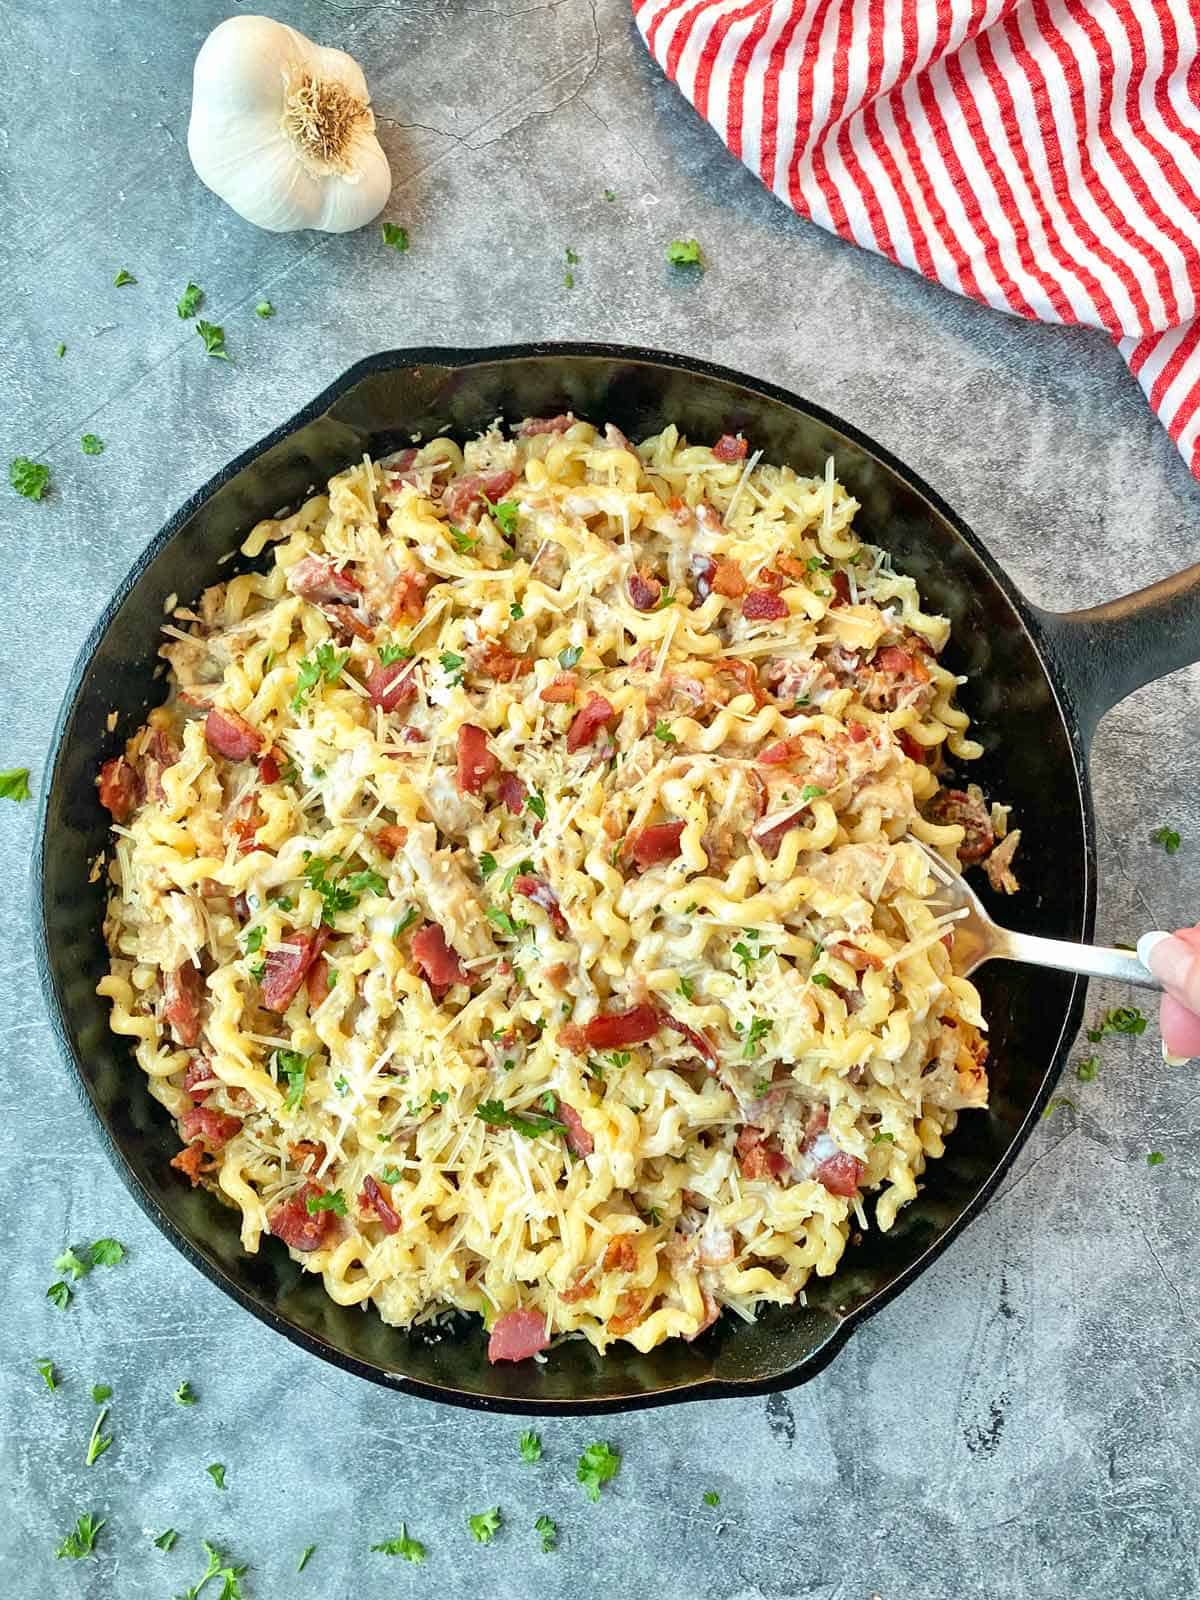 A skillet of hot pasta topped with parmesan cheese cream sauce with chicken and bacon.